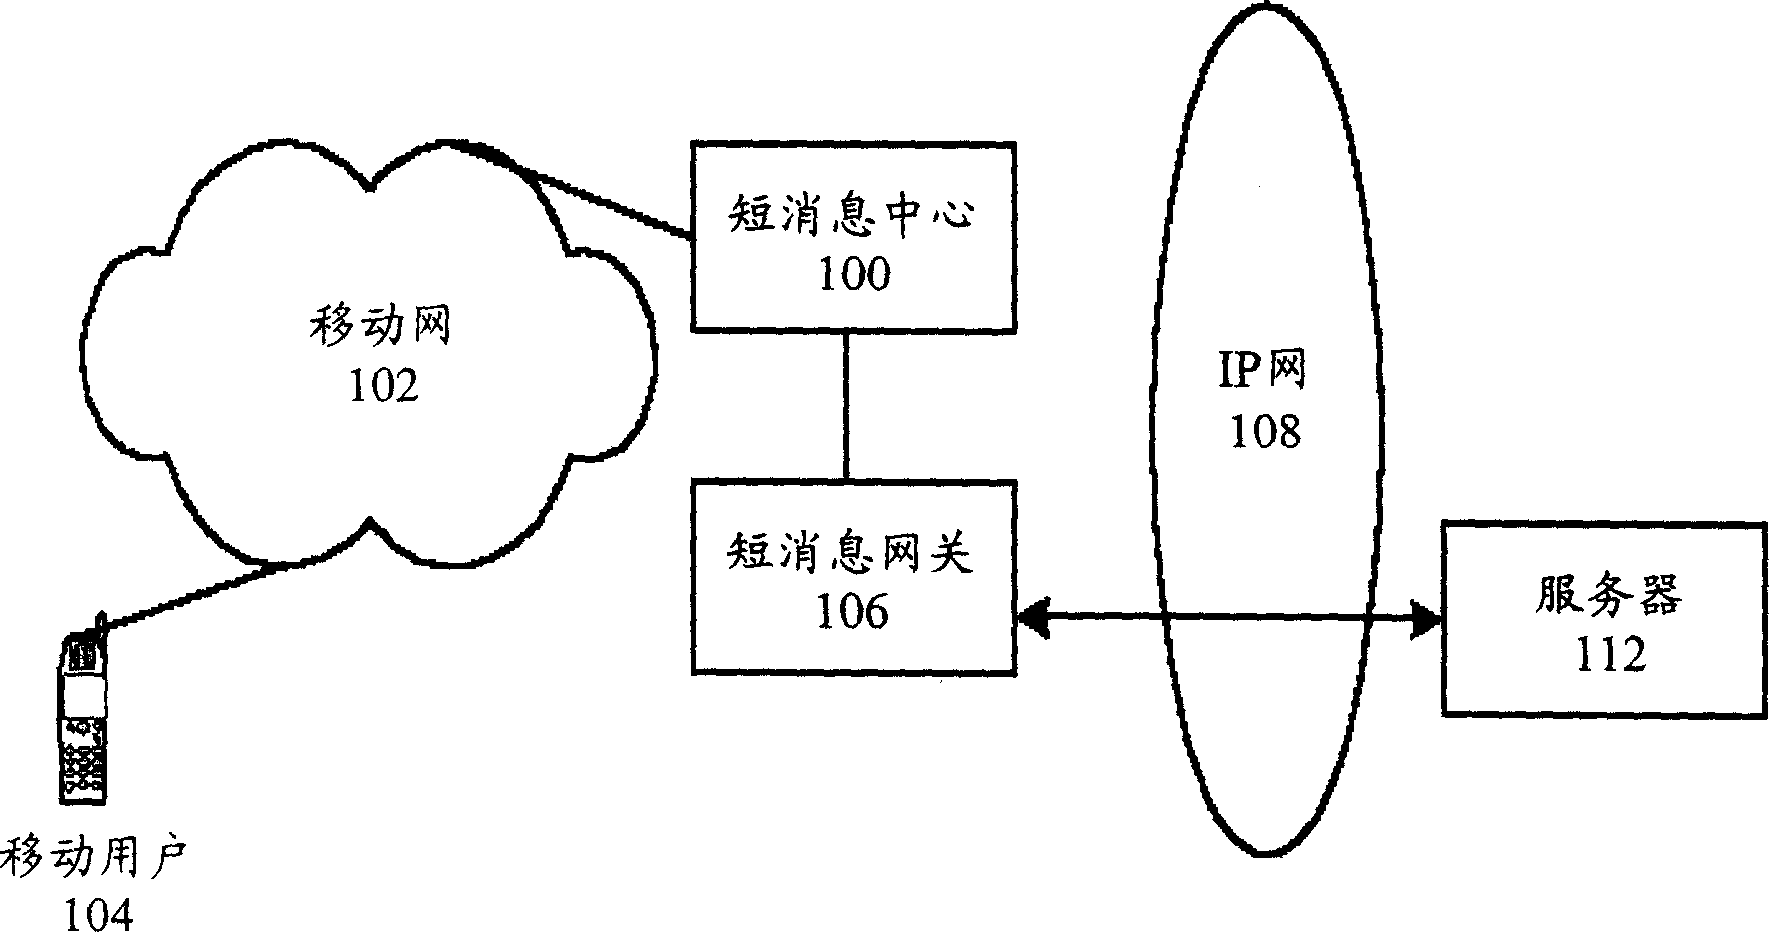 Method and system for receiving, transmitting and processing electronic message in mobile network